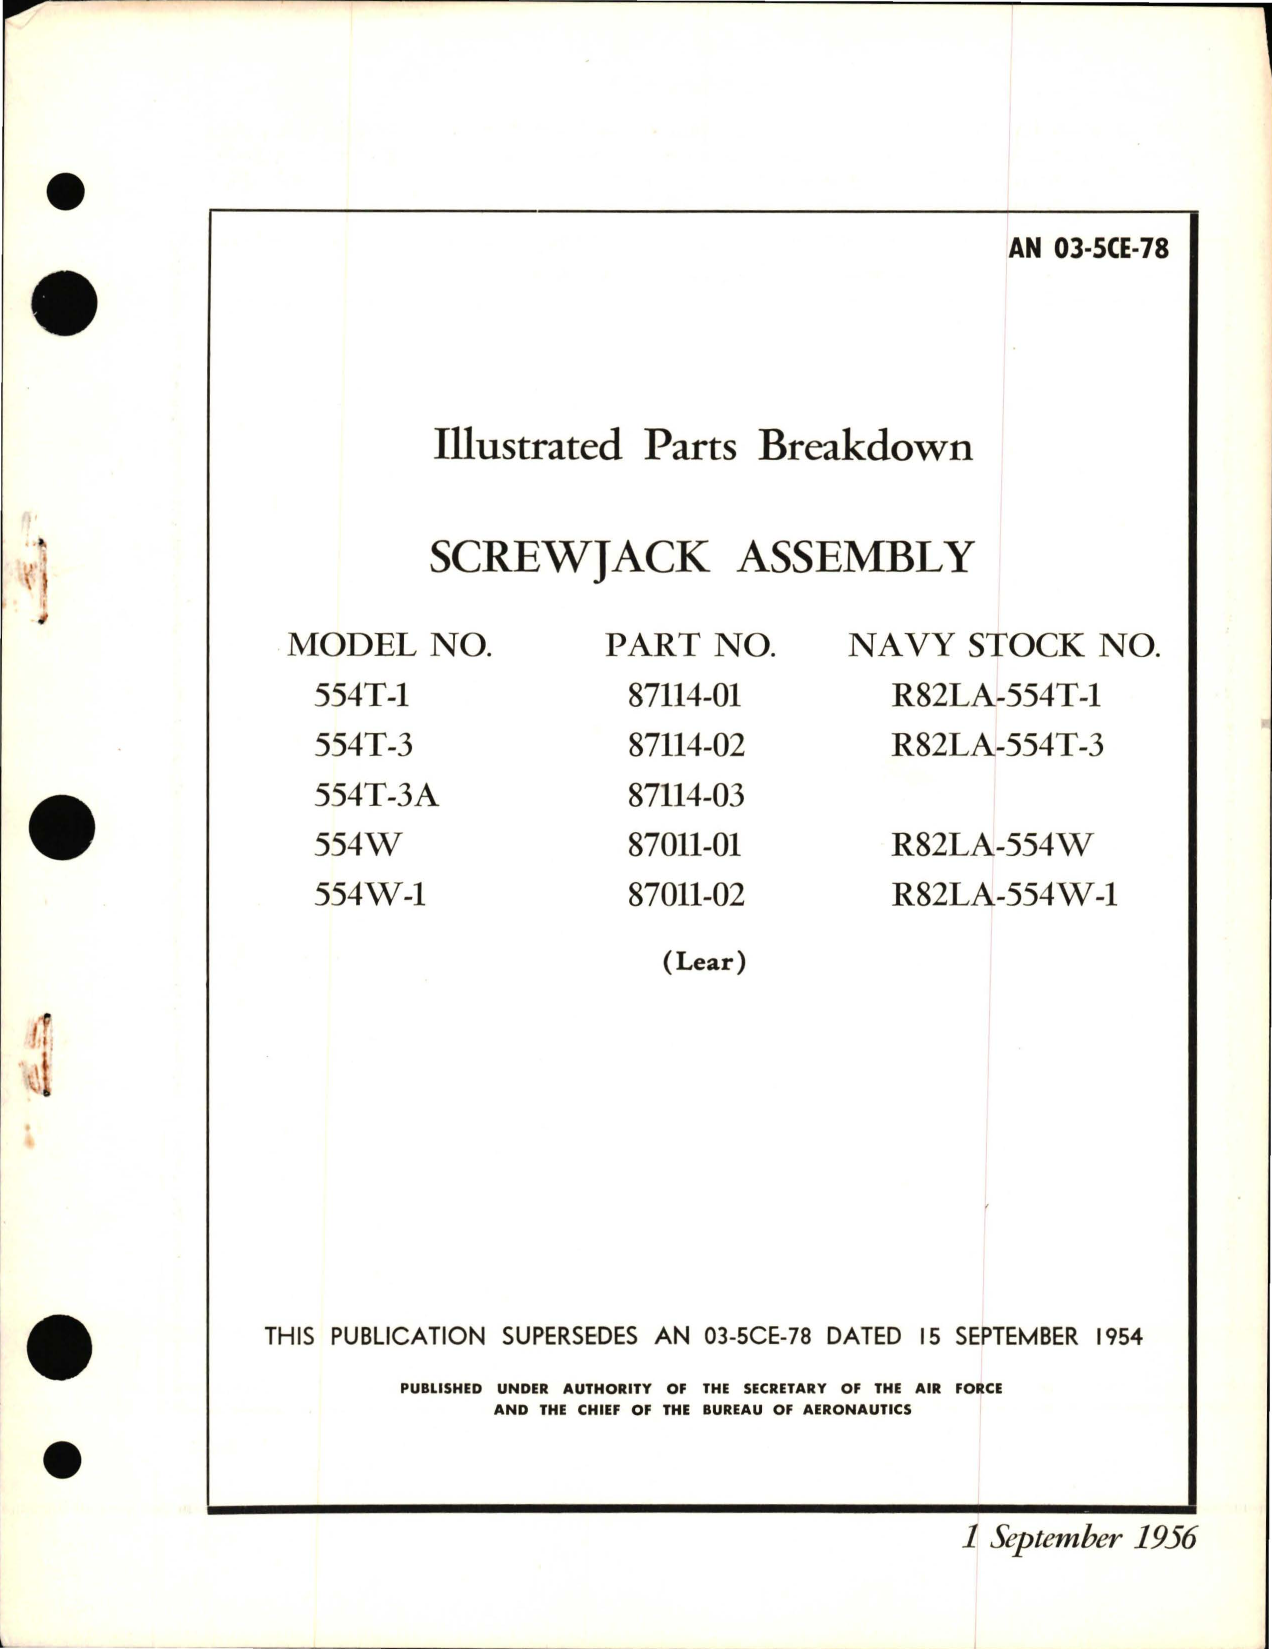 Sample page 1 from AirCorps Library document: Illustrated Parts Breakdown for Screwjack Assembly - 554T and 554W Series 